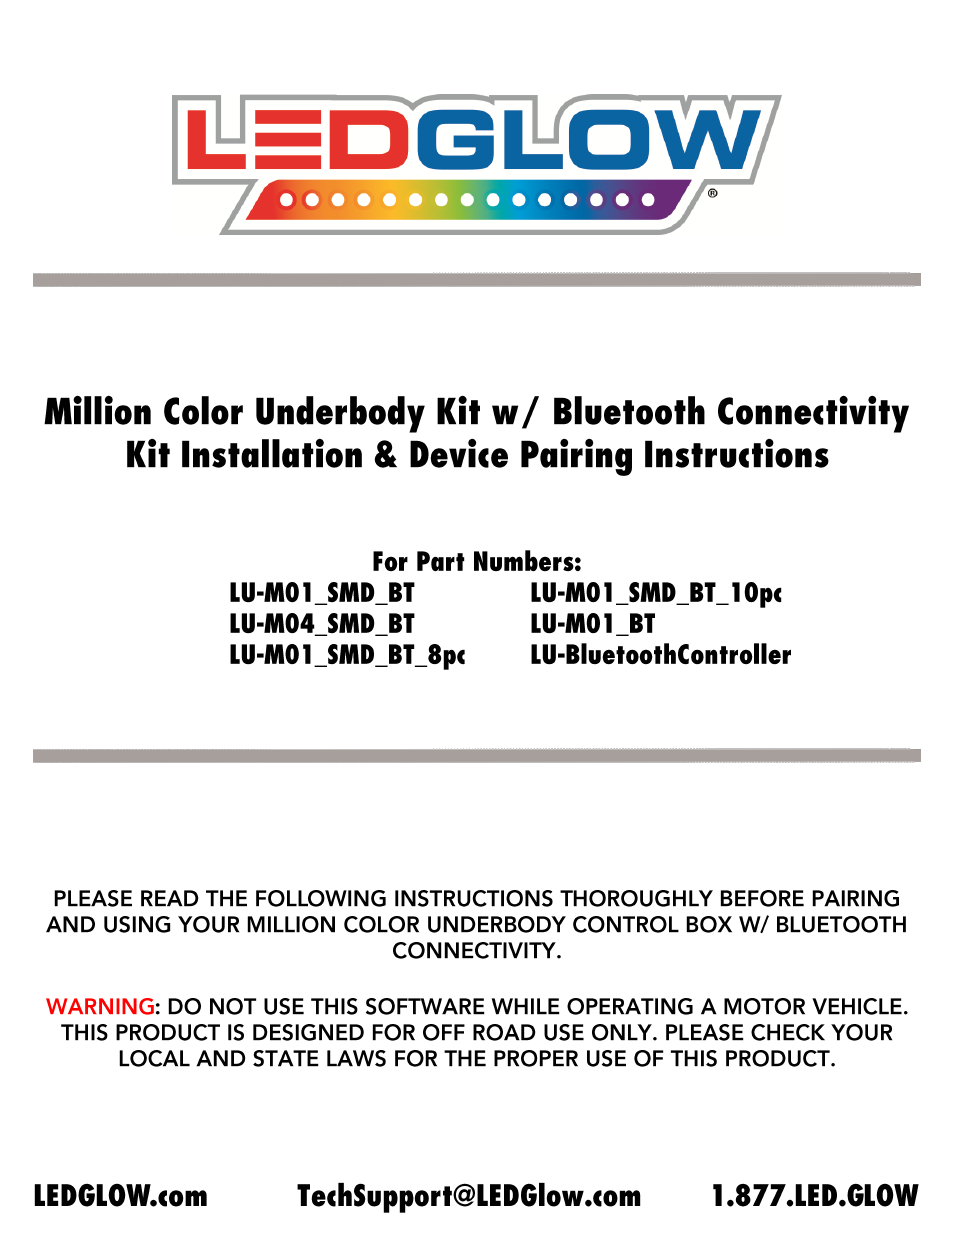 Million Color SMD LED Underbody Lighting Kit with Bluetooth Connectivity